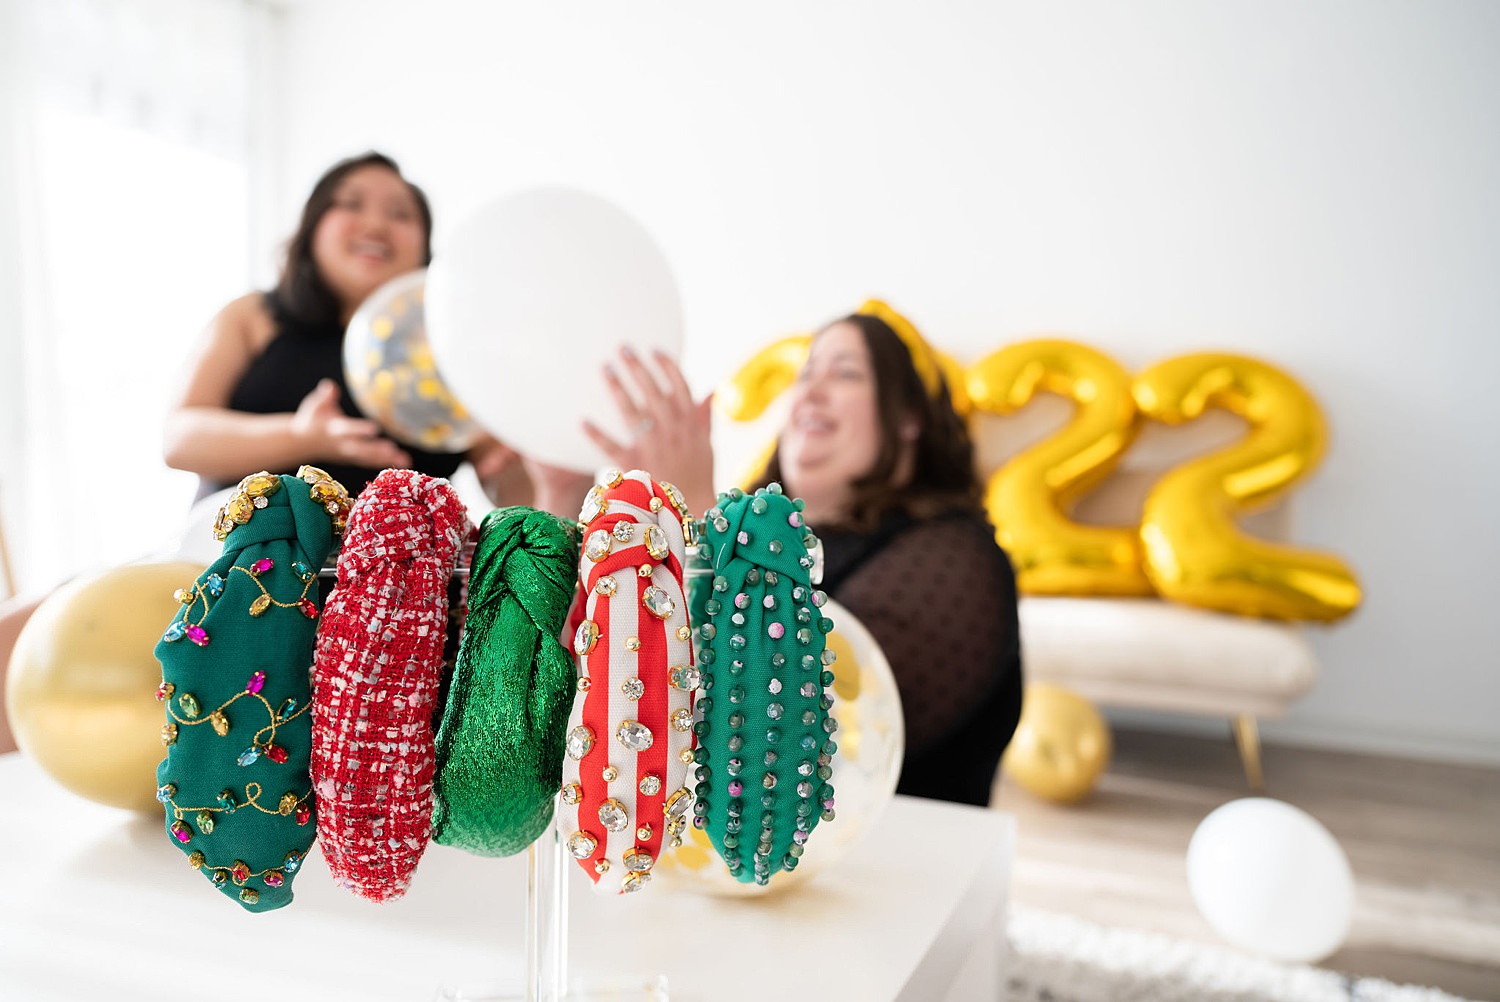 Multiple headbands on in front with colors green, red, silver green, striped red. Headbands come with different designs. At the background, there are two happy women holding a balloon and celebrating new year.